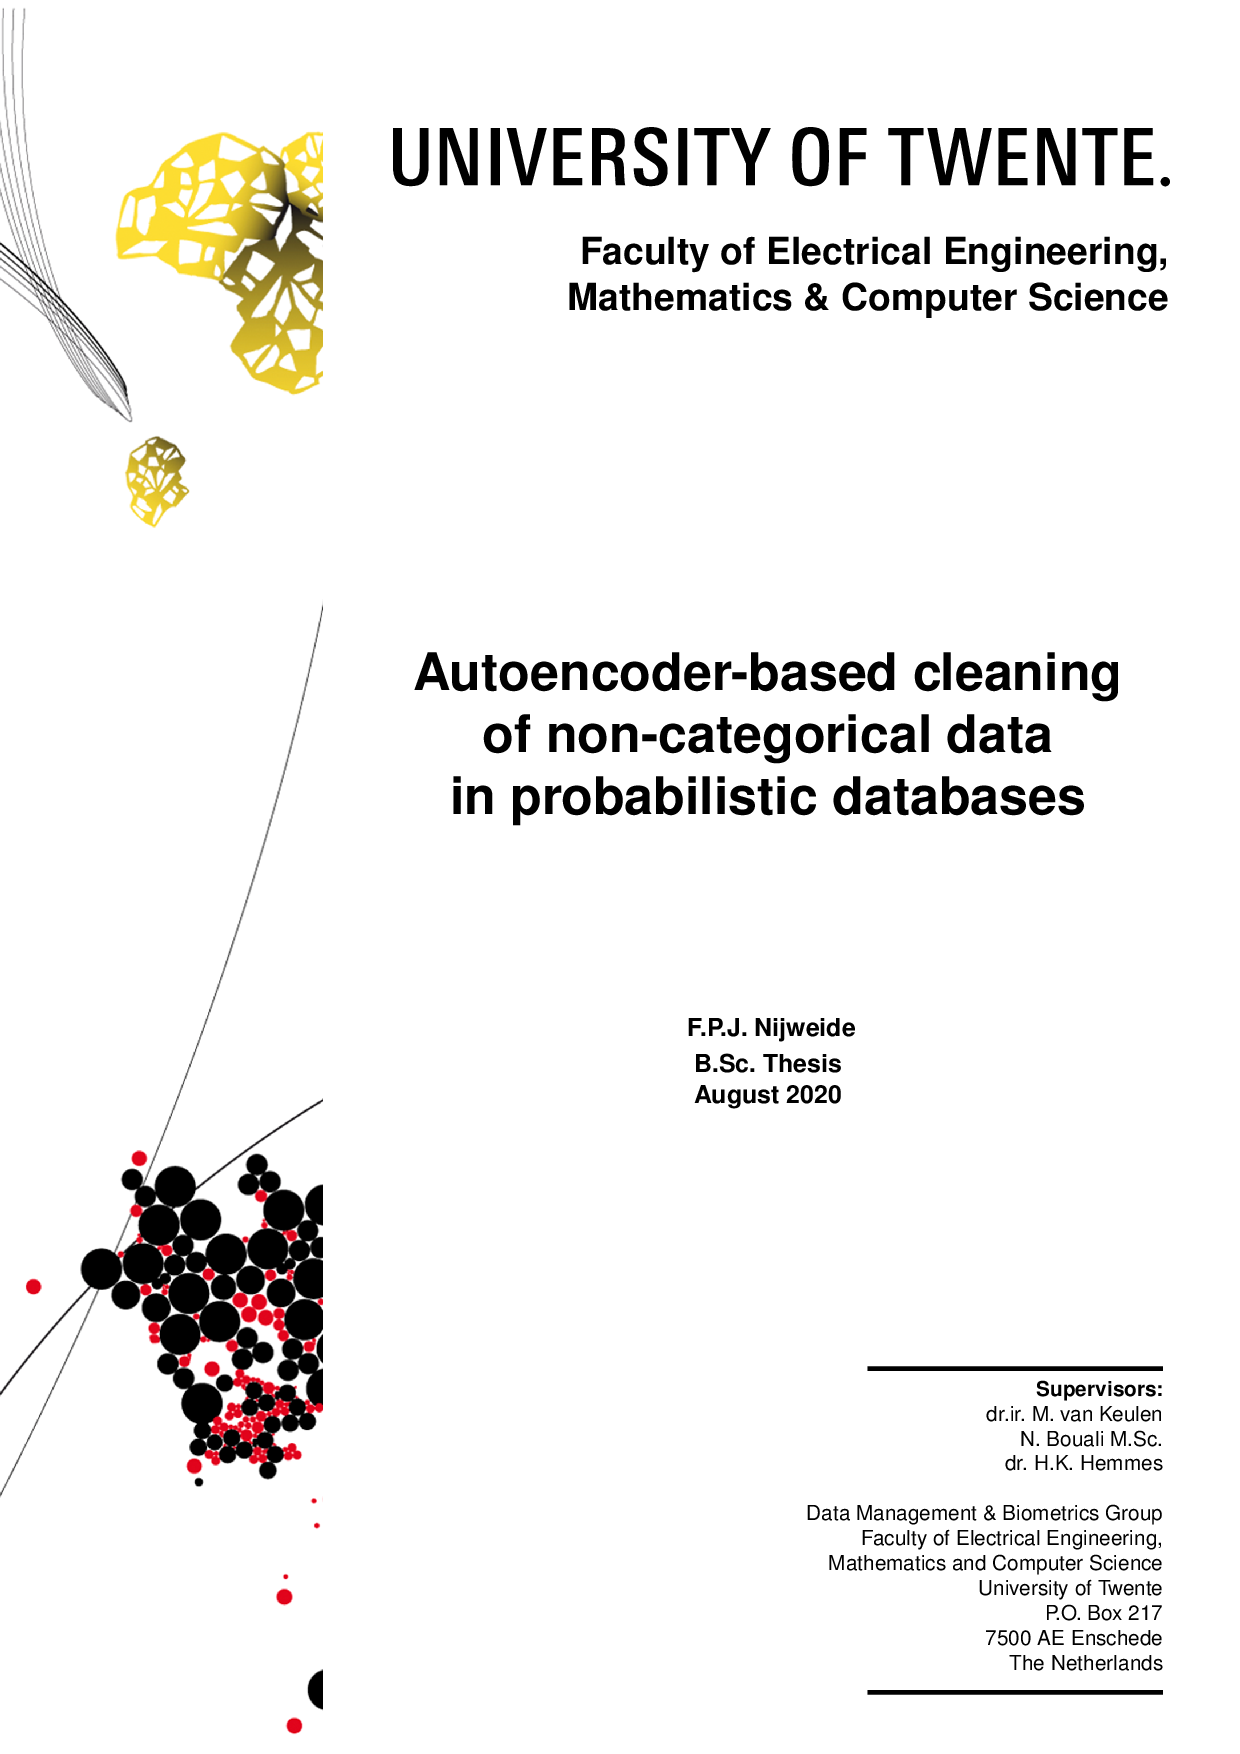 Poster, Autoencoder-based cleaning of non-categorical data in probabilistic databases